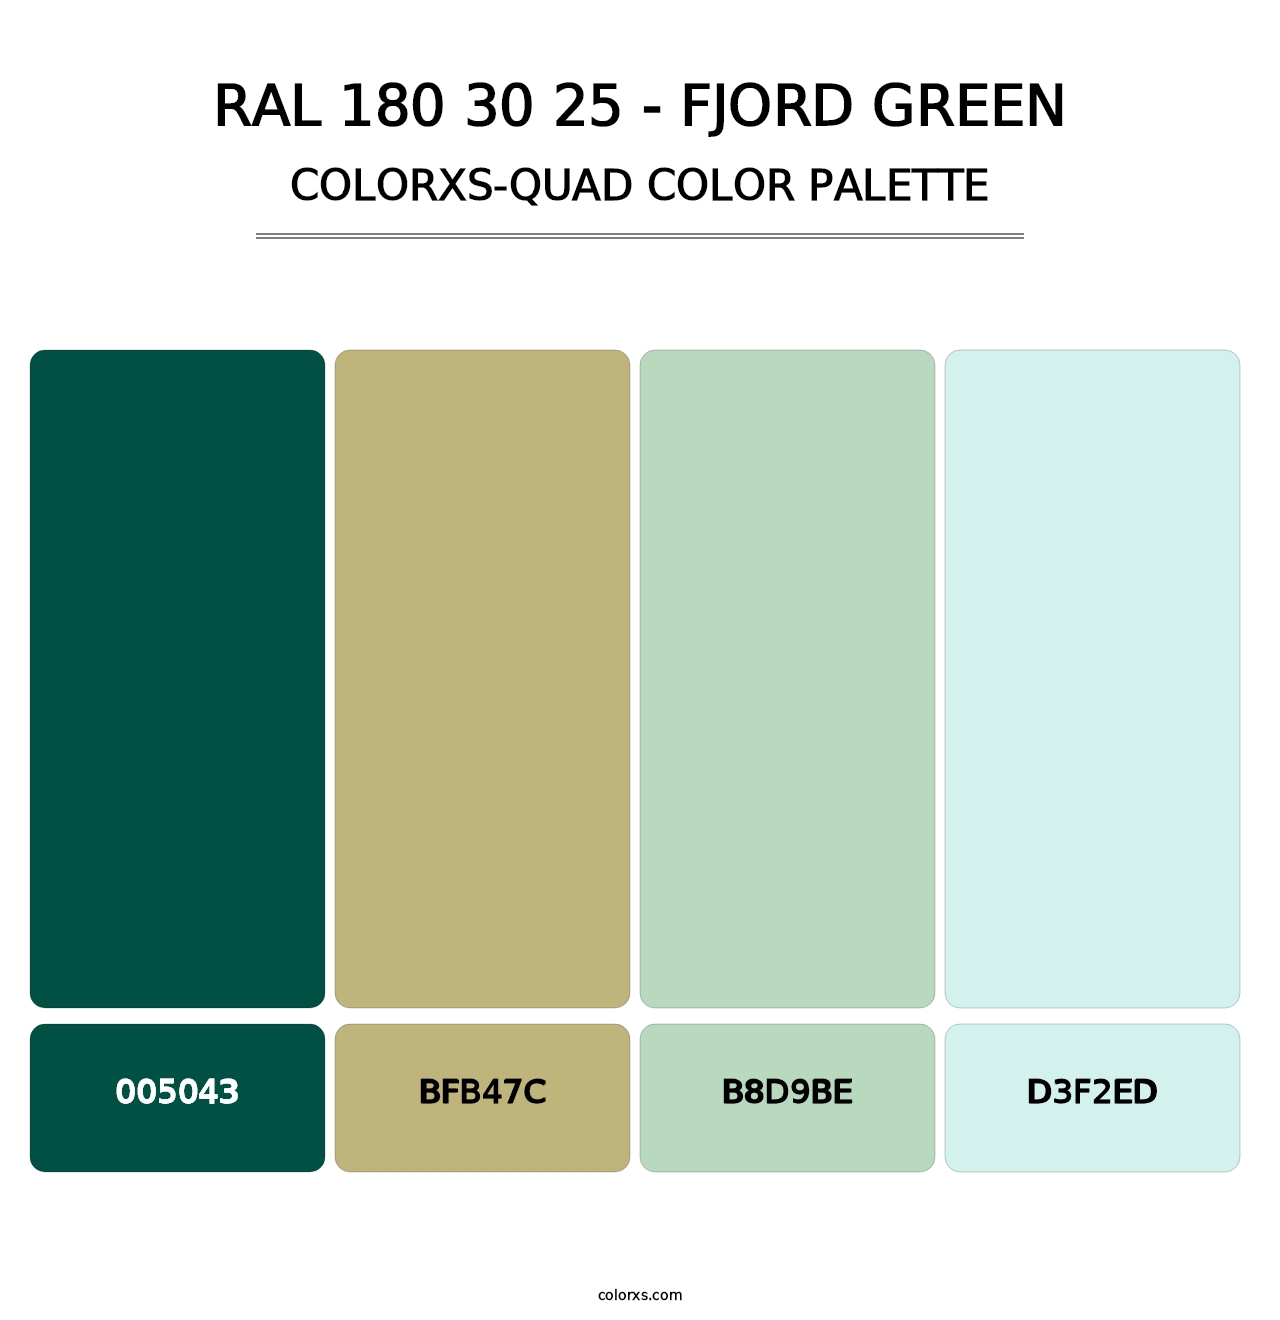 RAL 180 30 25 - Fjord Green - Colorxs Quad Palette